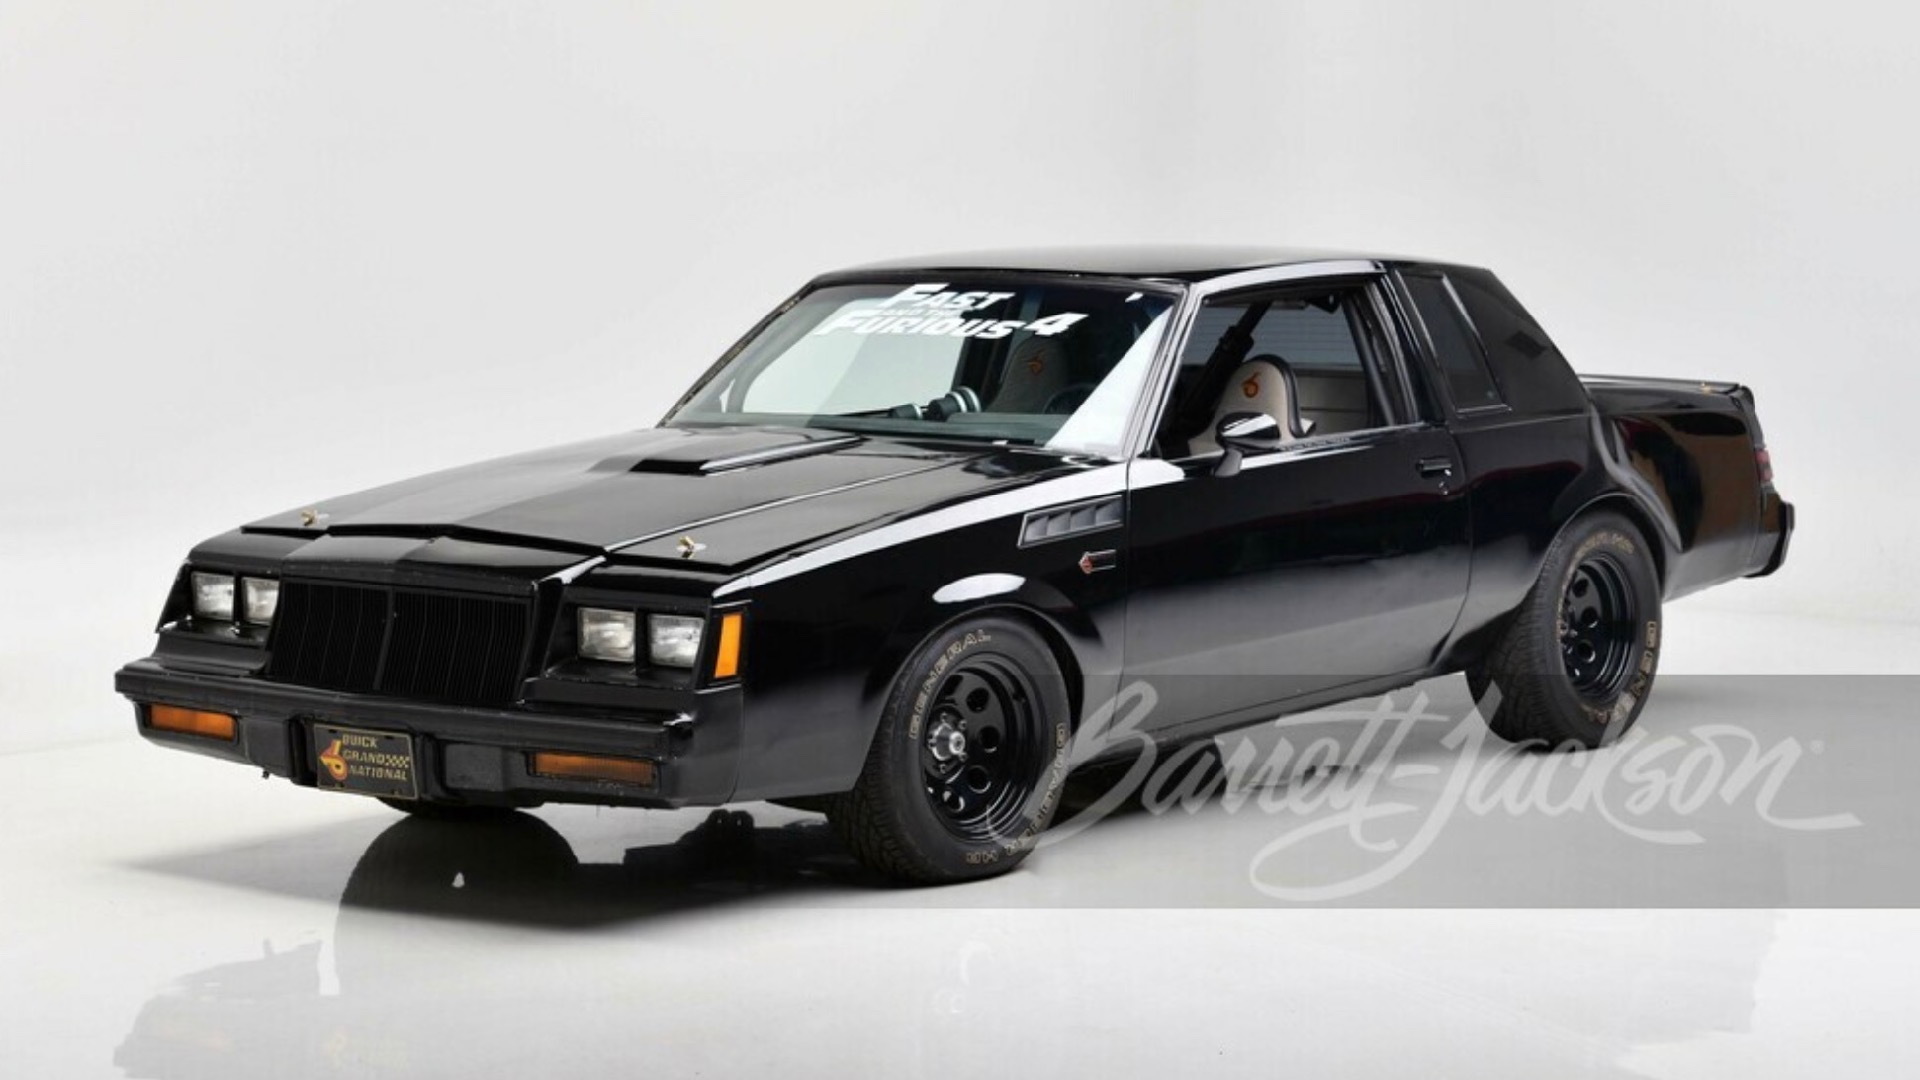 1987 Buick Grand National from "Fast and Furious" (photo via Barrett-Jackson)